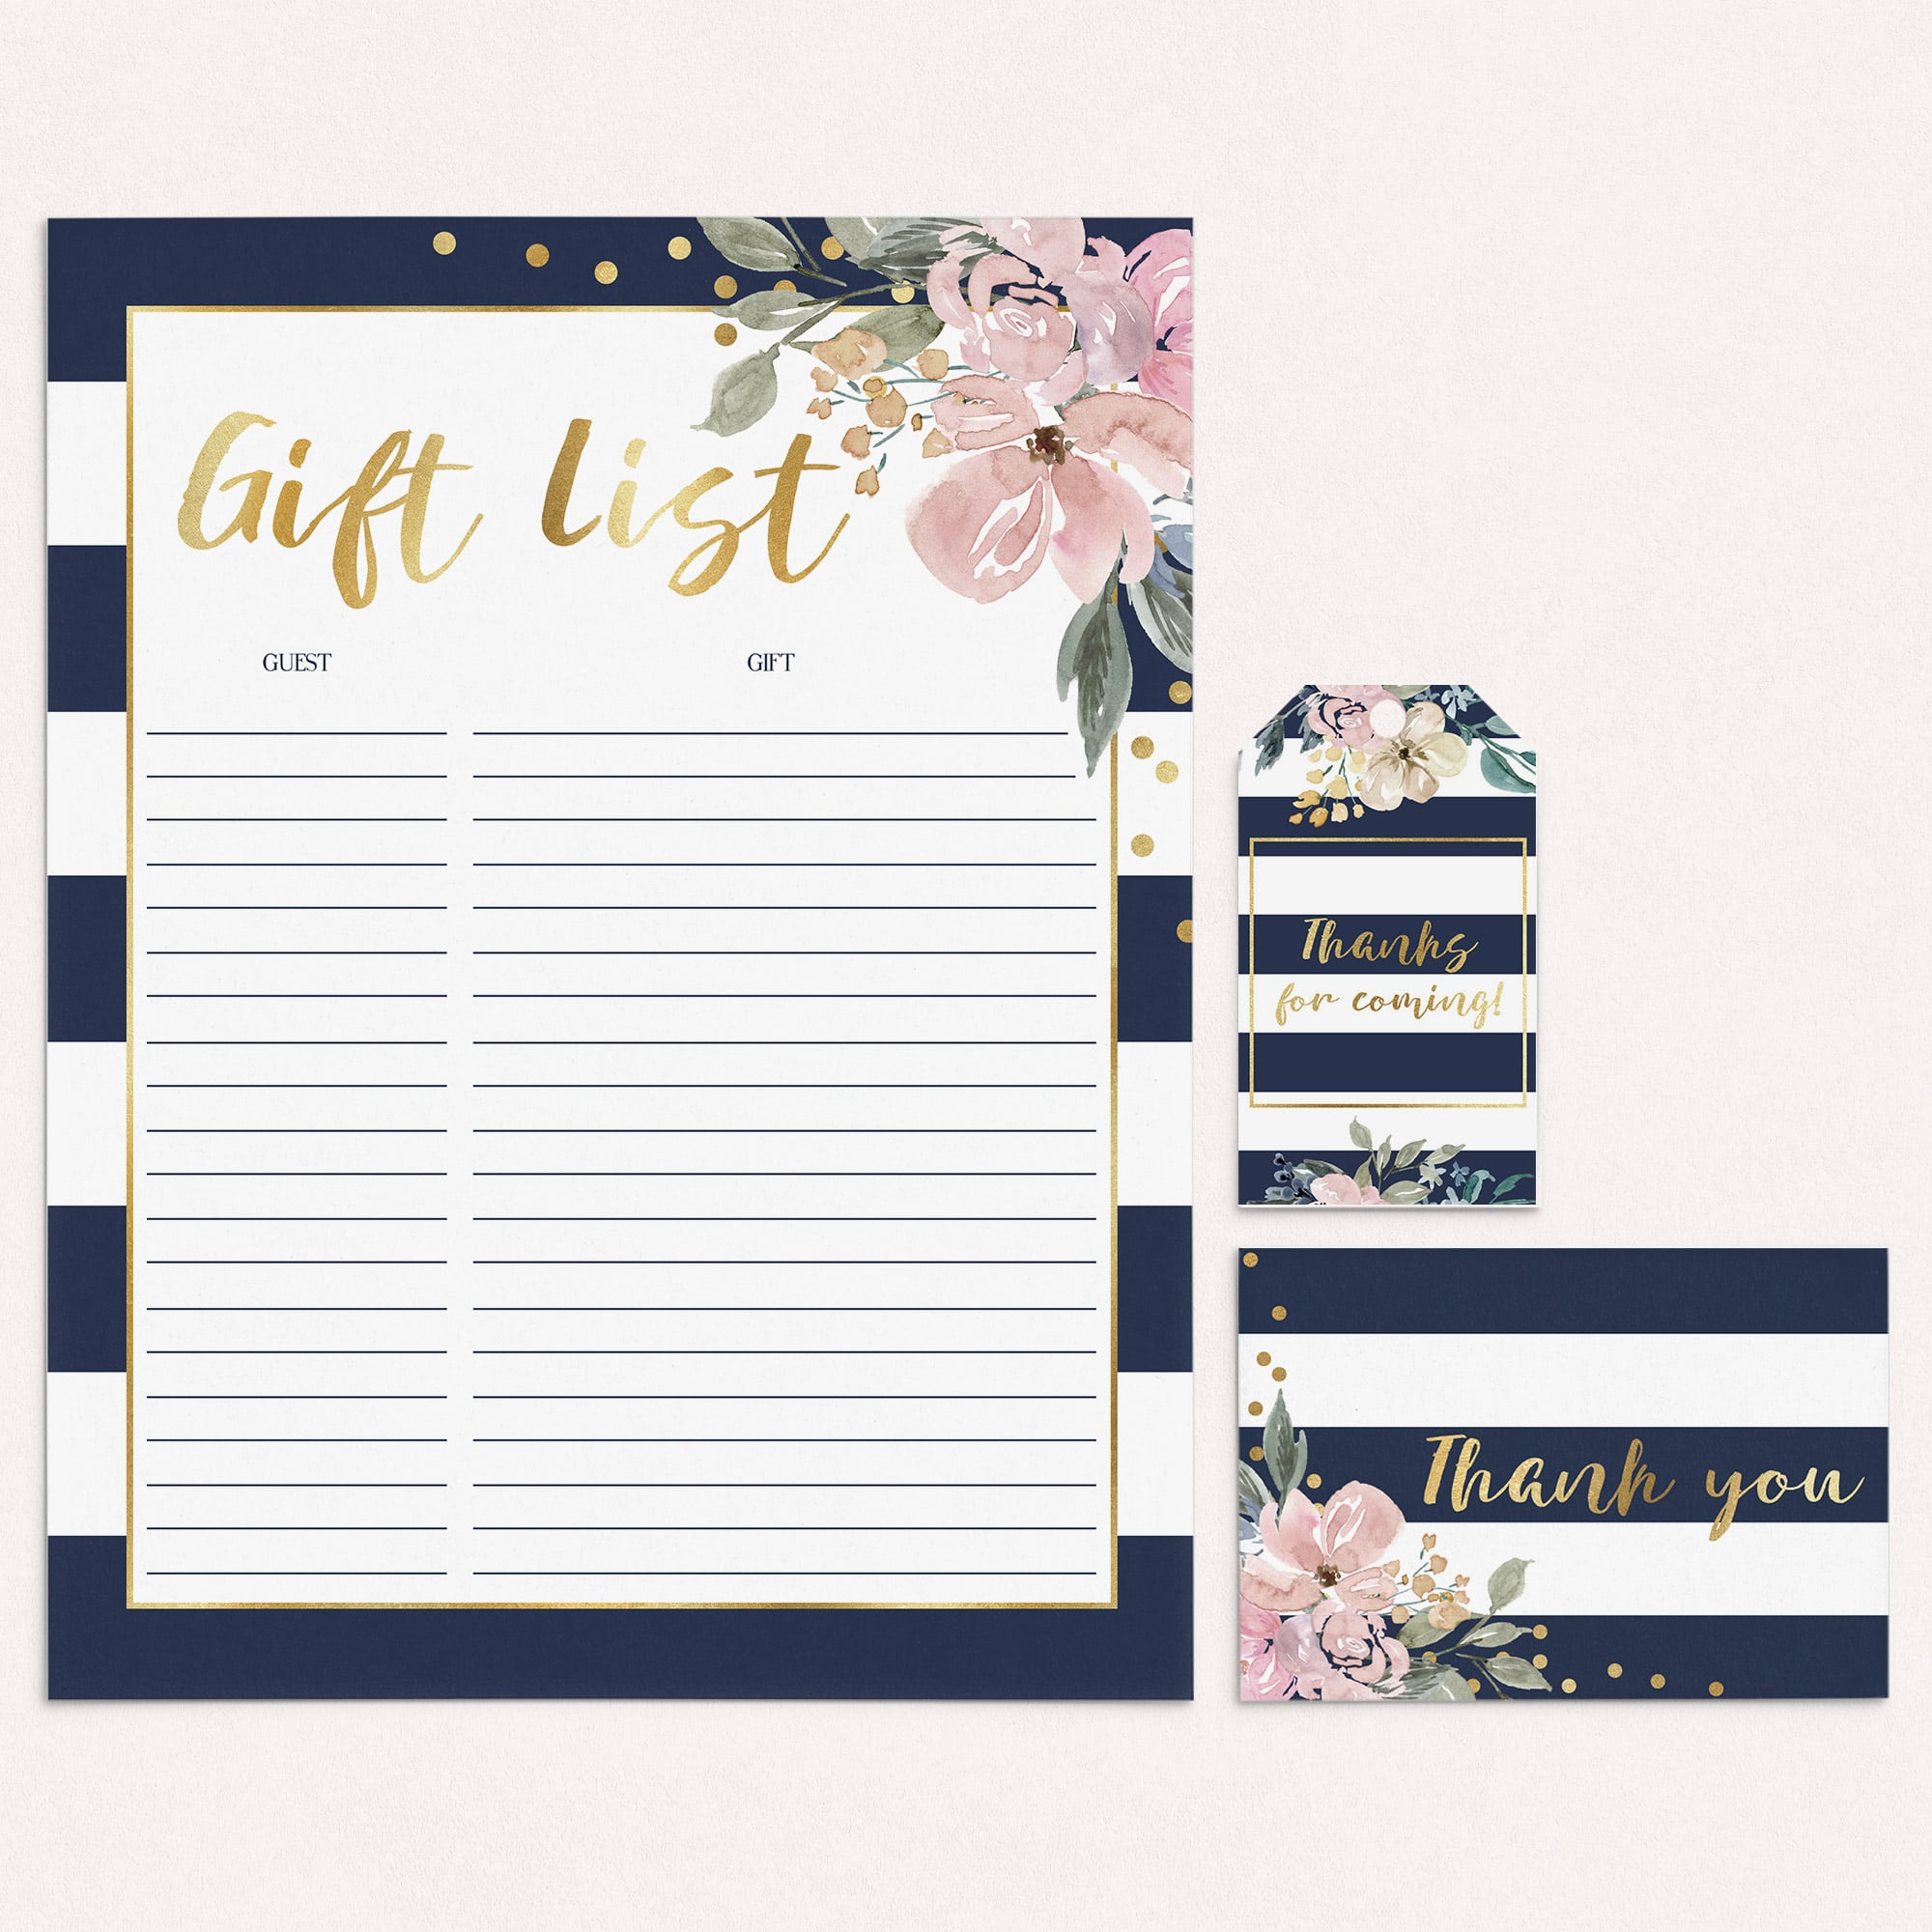 Printable Gift and Guest List, Thank You Notecards and Tags Bohemian Theme by LittleSizzle